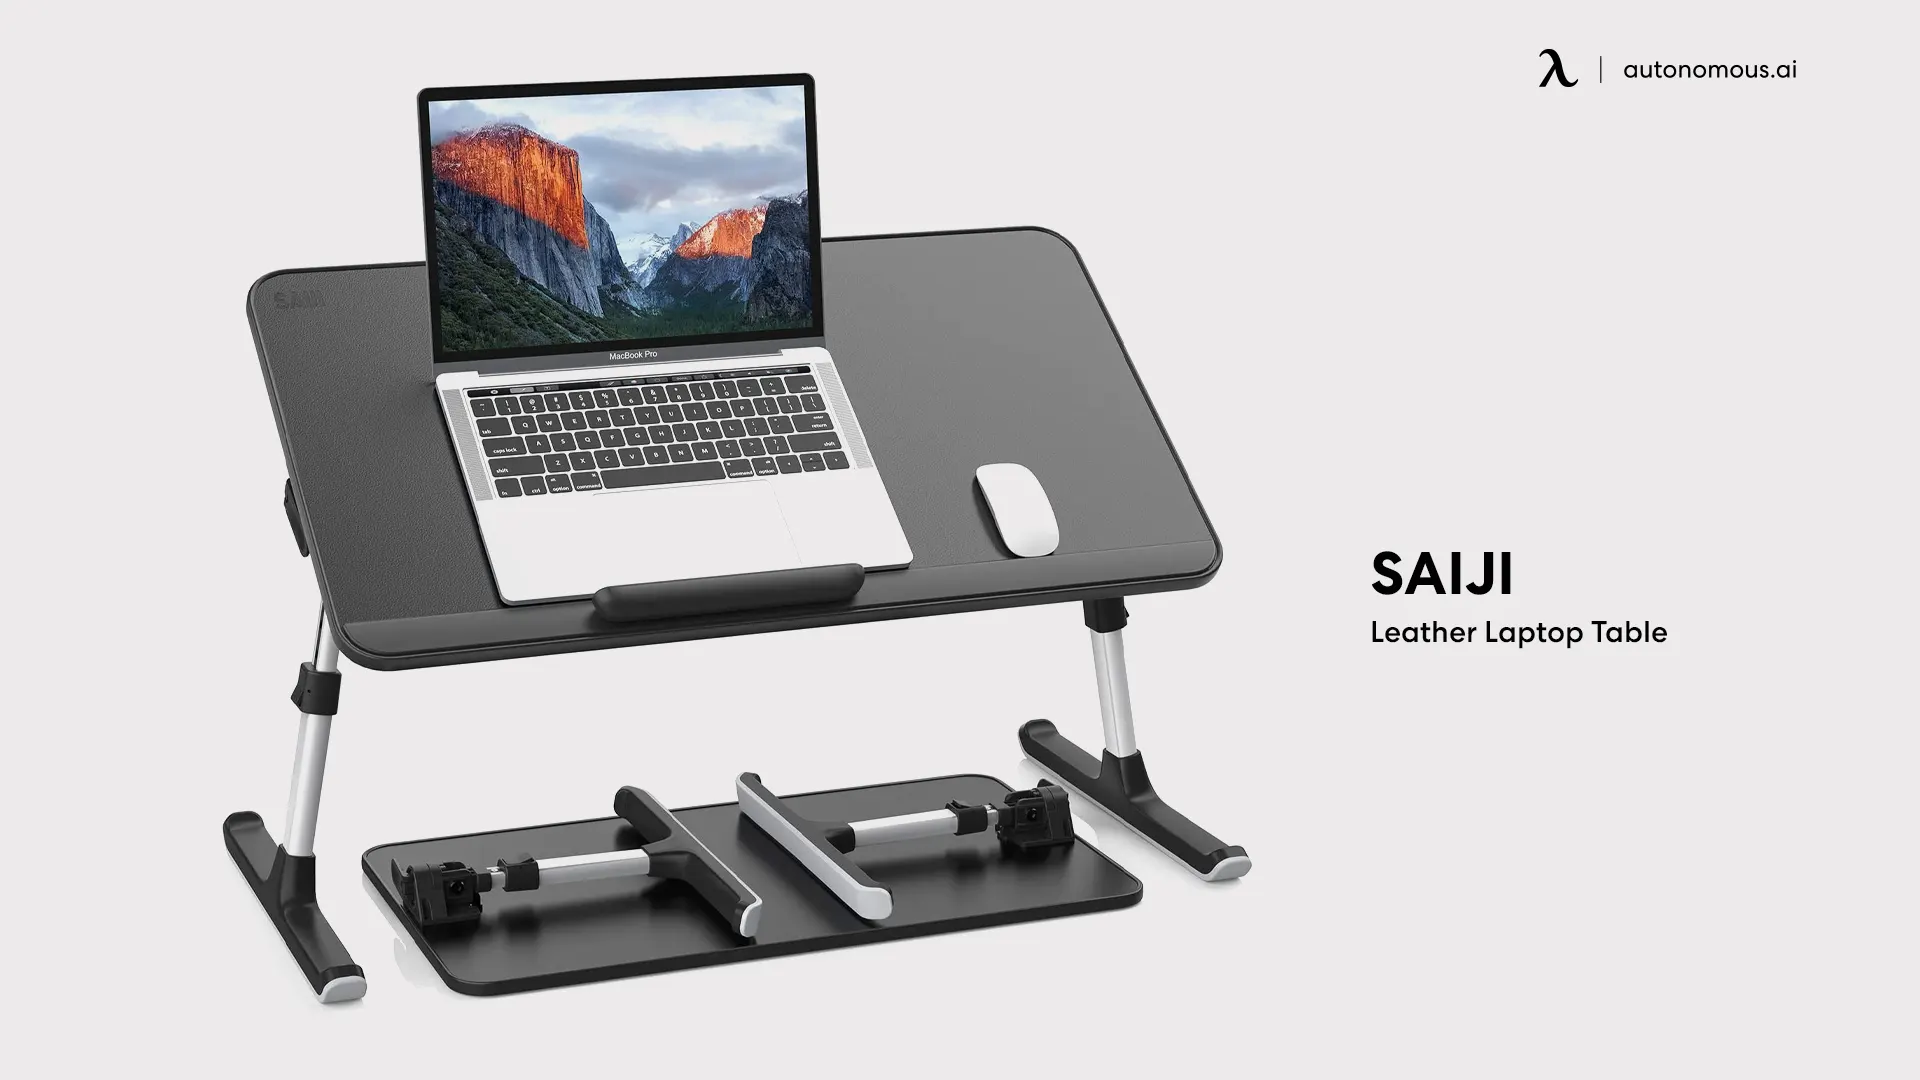 Leather Laptop Table by Saiji - laptop stand for bed